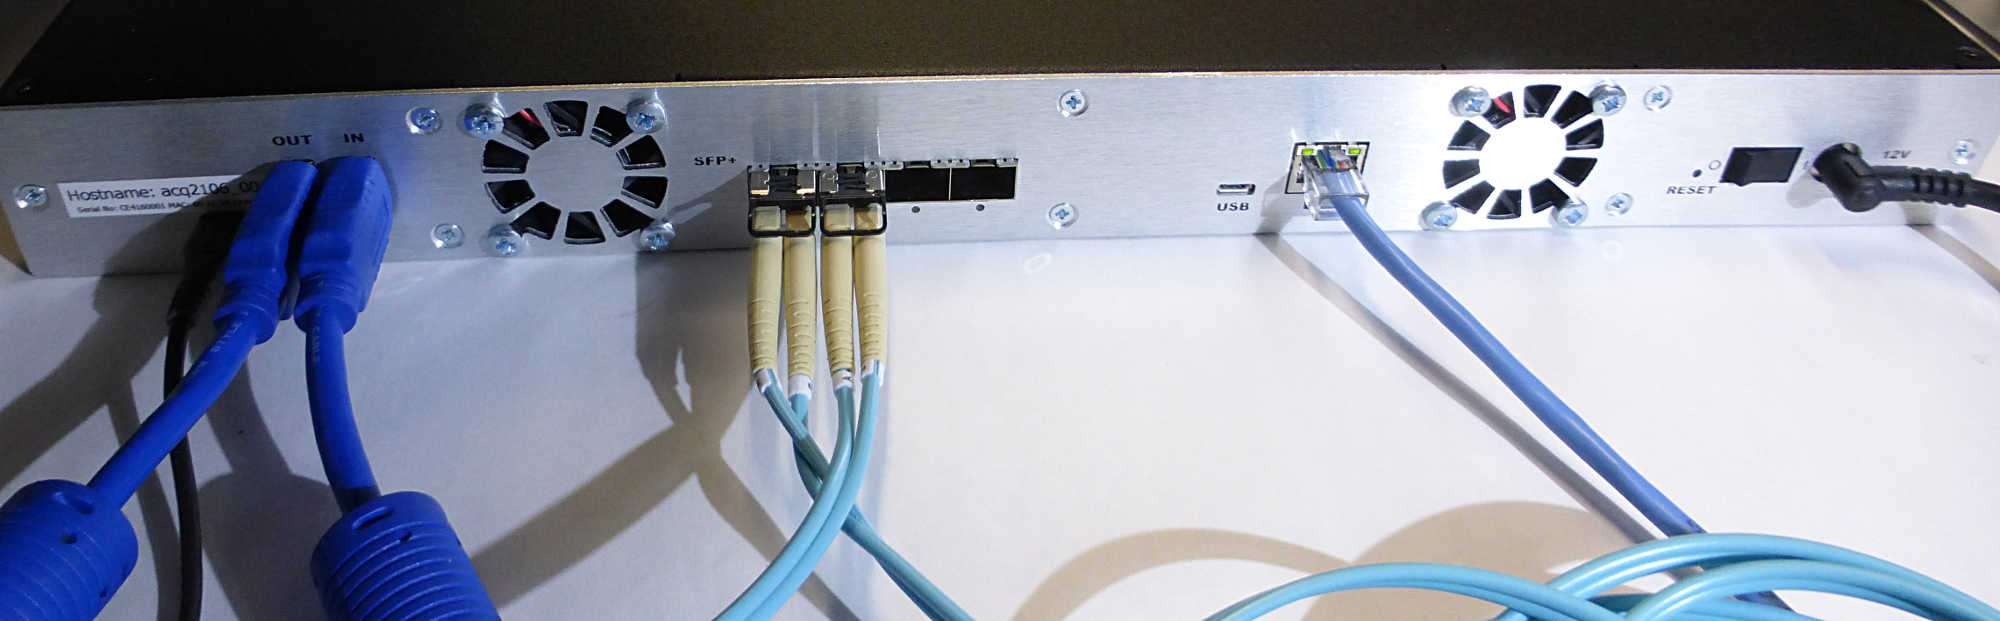 ACQ2106 rear panel showing 4 x SFP fiber-optic ports, SYNC cable and Ethernet.